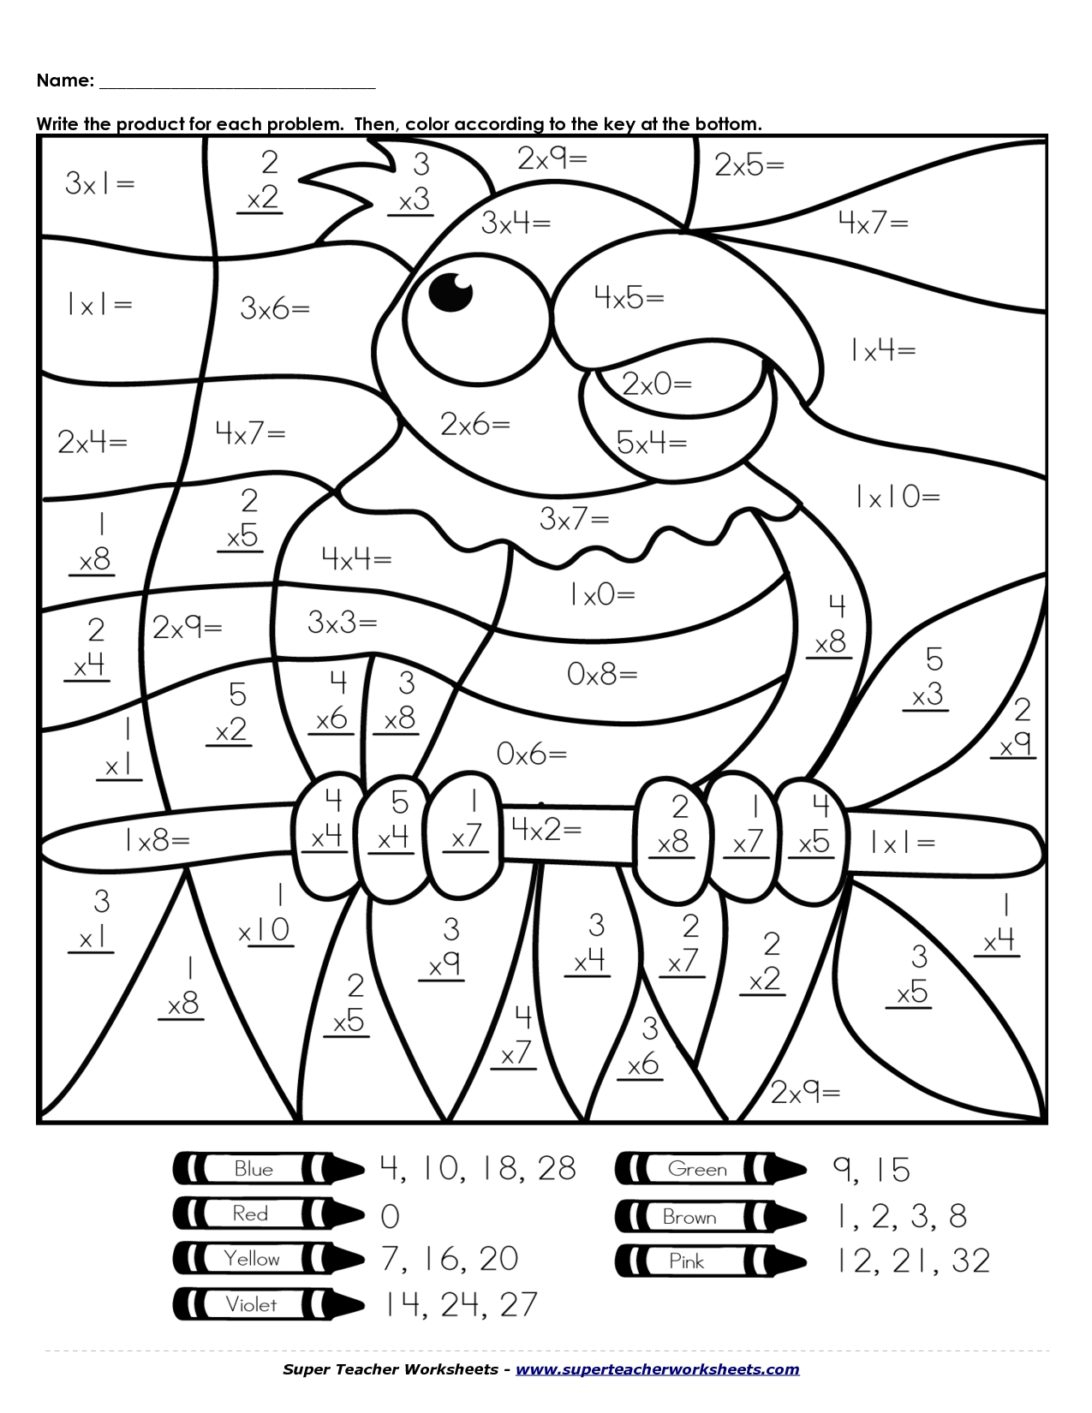 Coloring Pages : Free Multiplication Color Clip Art inside Printable Multiplication Coloring Worksheets